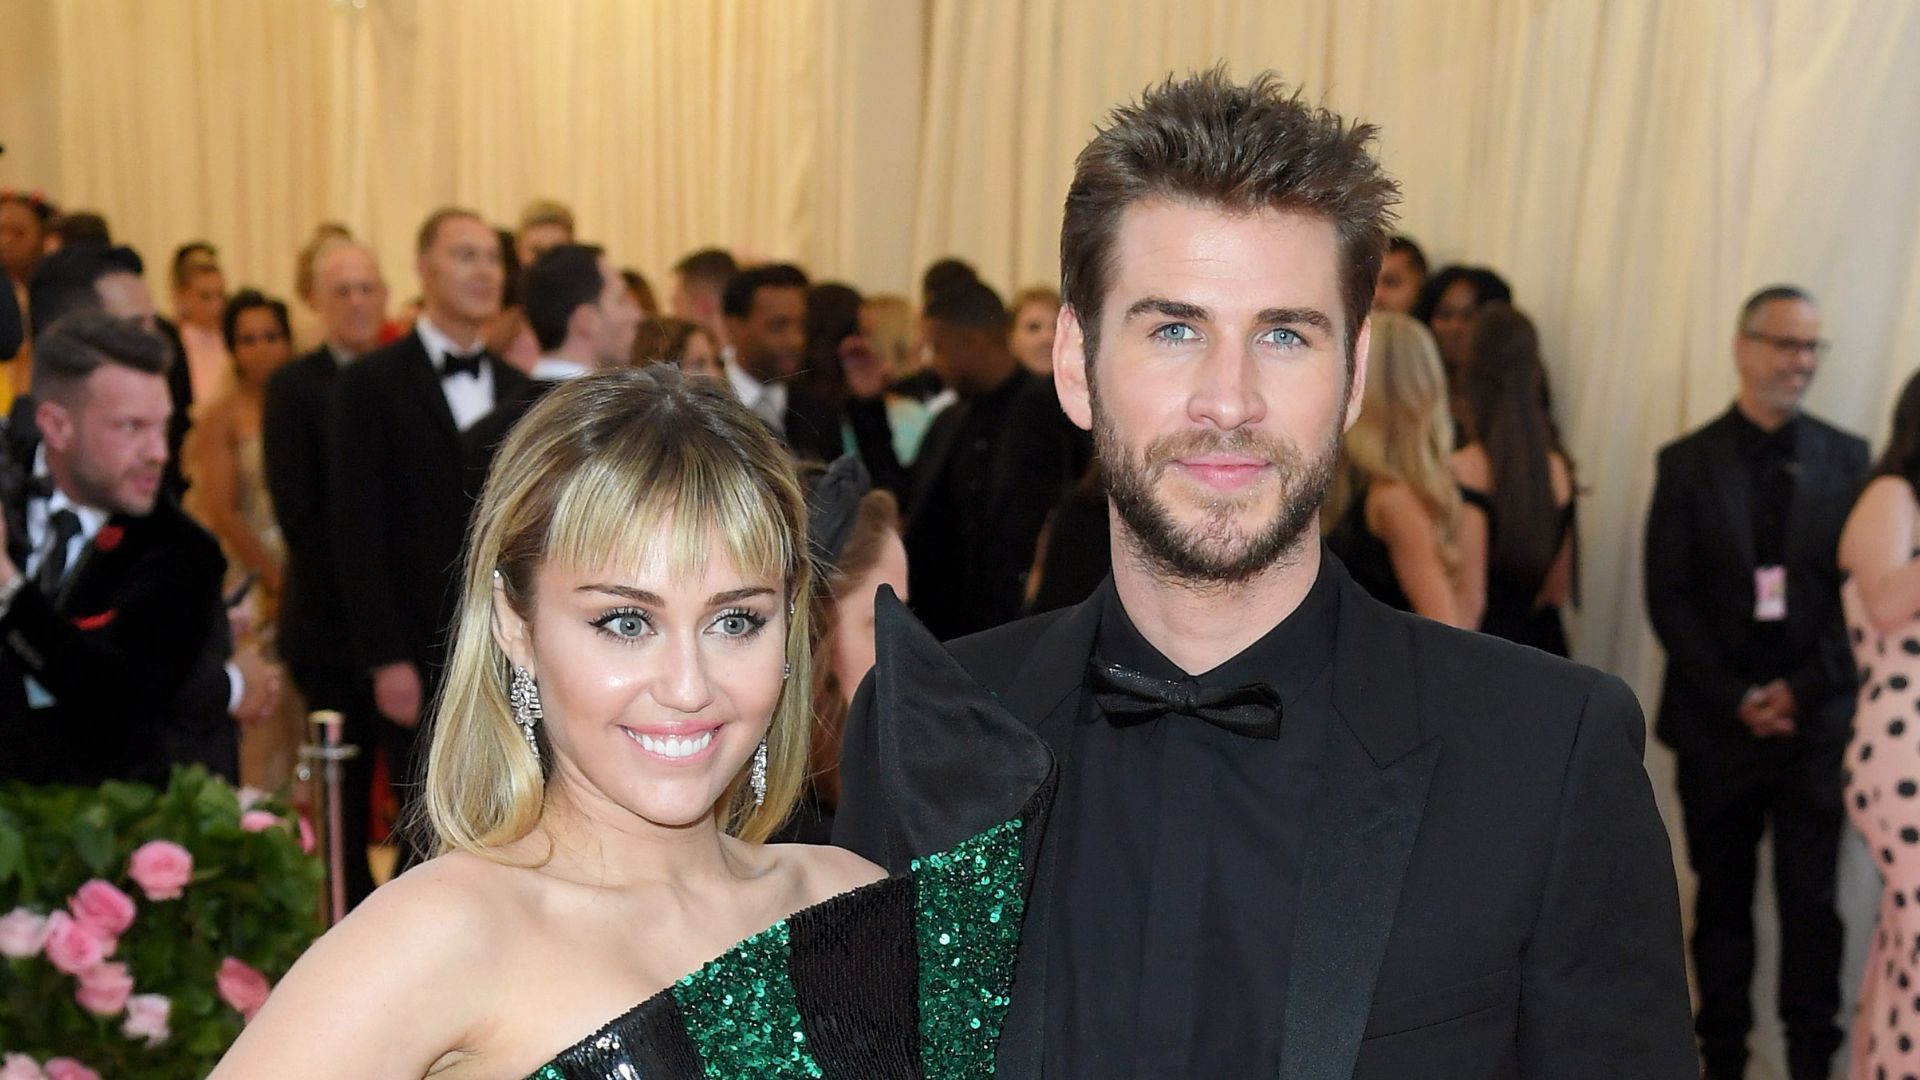 Miley Cyrus and Liam Hemsworth shortest celebrity marriages